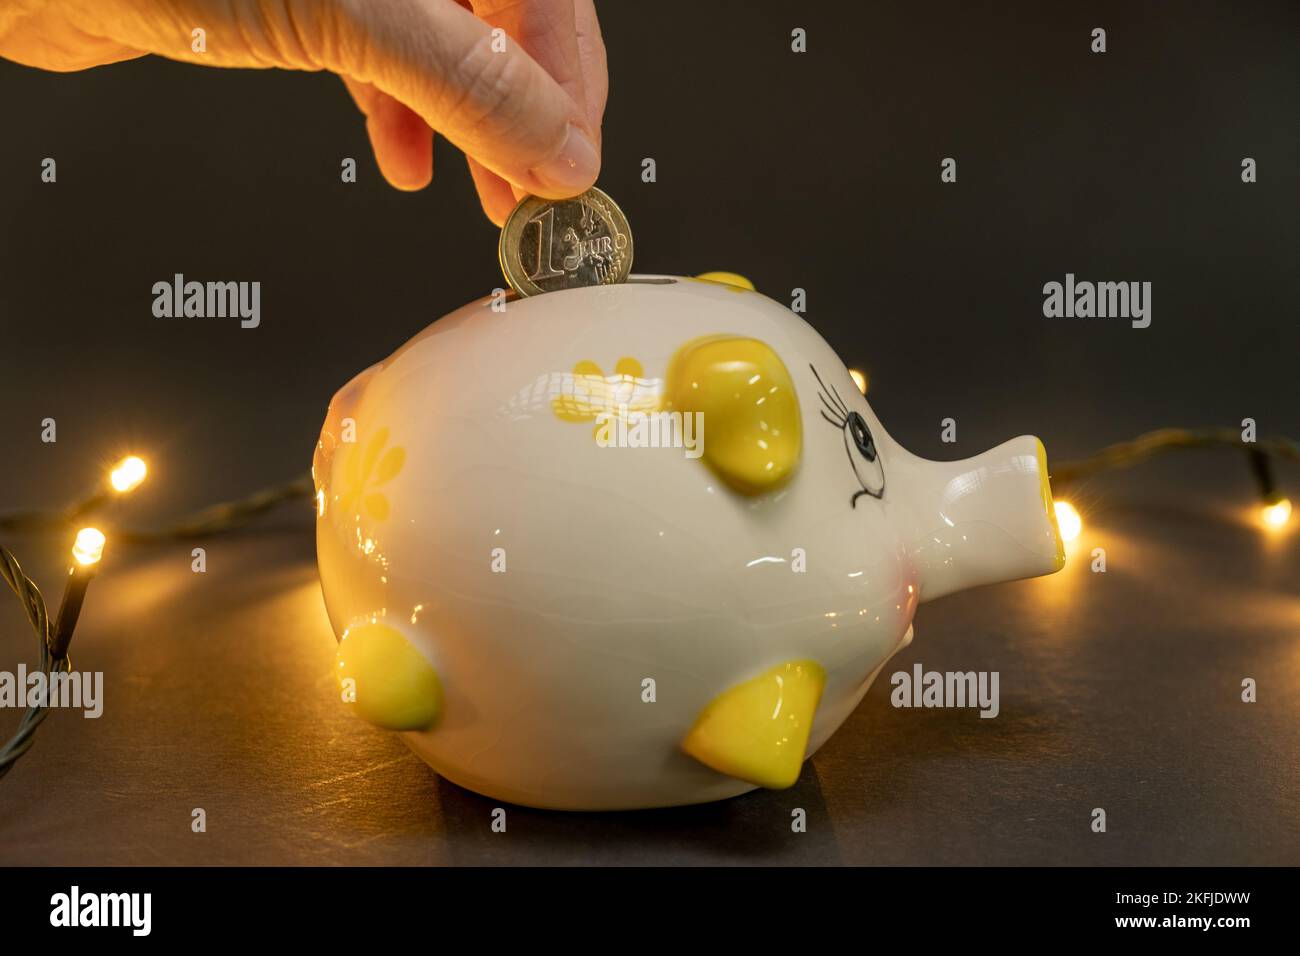 Putting one euro coin in a piggy bank, on a dark background with small led lights. Concept of saving money. copy space. Stock Photo